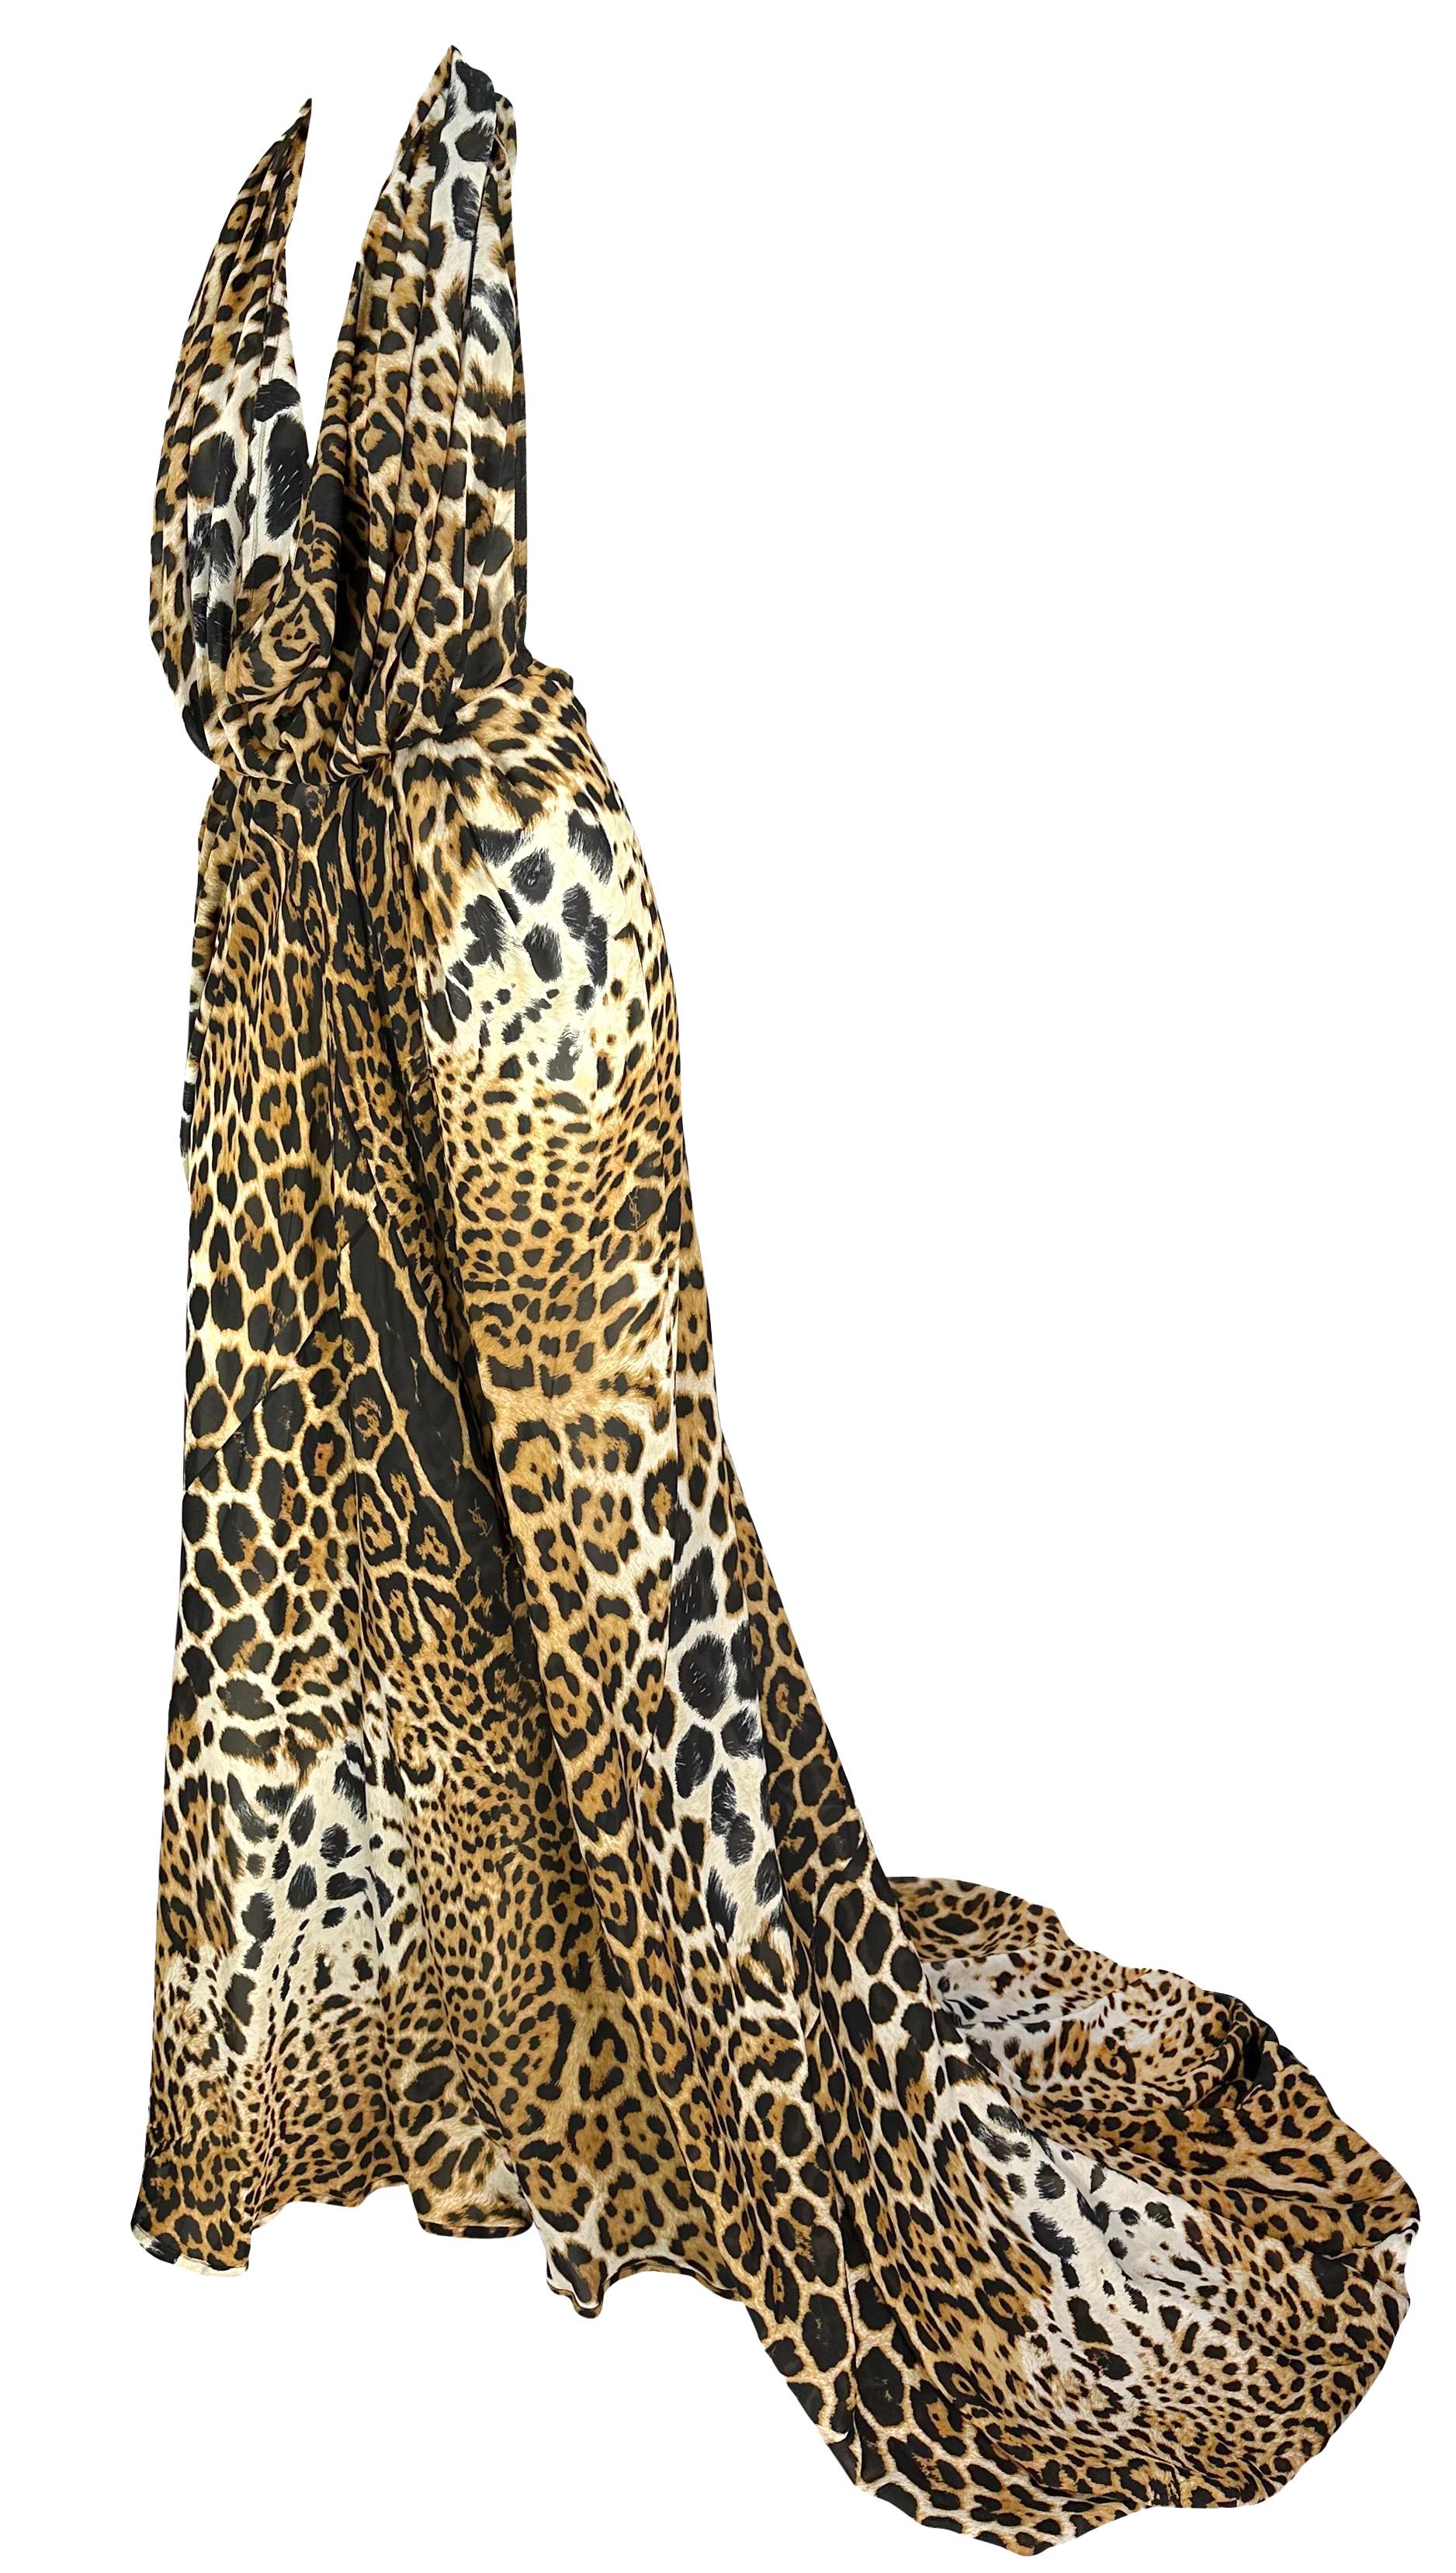 NWT S/S 2002 Yves Saint Laurent by Tom Ford Backless Halter Leopard Silk Gown For Sale 1